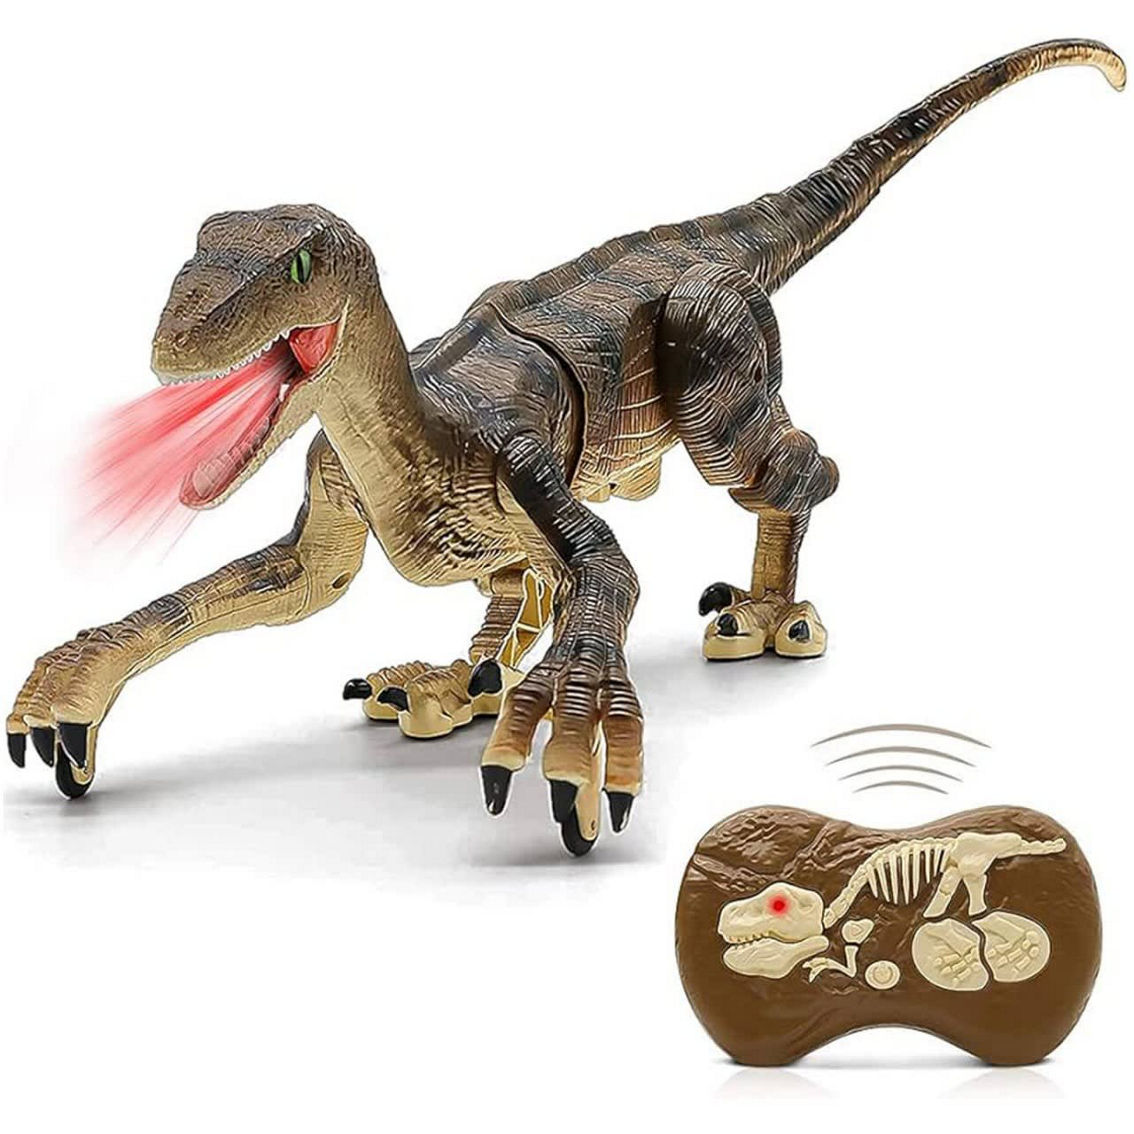 SM180-Br Remote control Dinosaur with lights and sound - Image 3 of 5